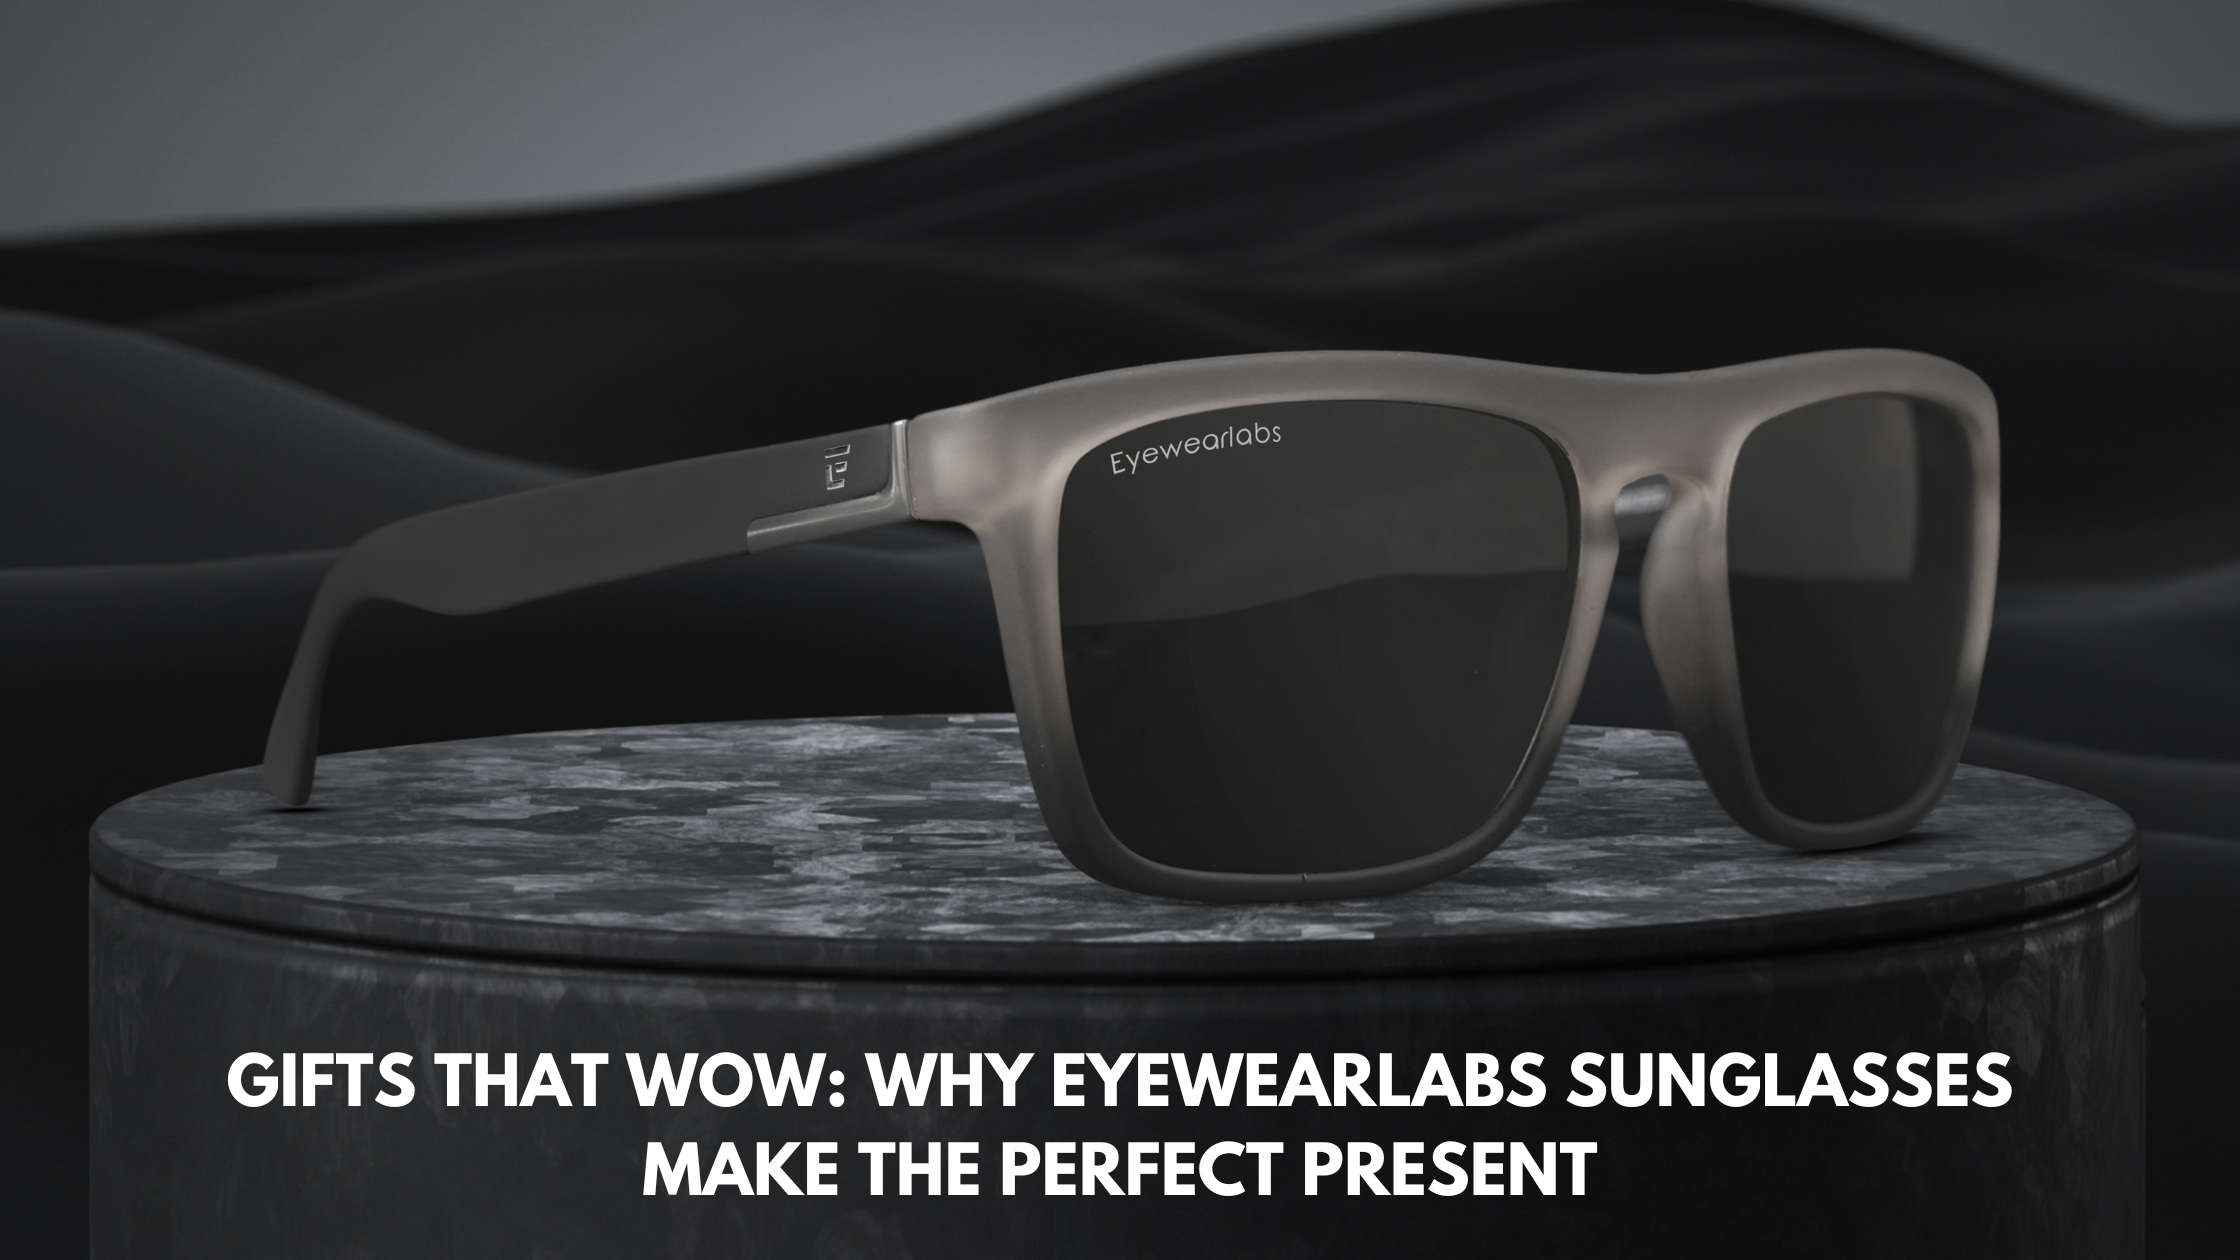 Gifts That Wow: Why Eyewearlabs Sunglasses Make the Perfect Present